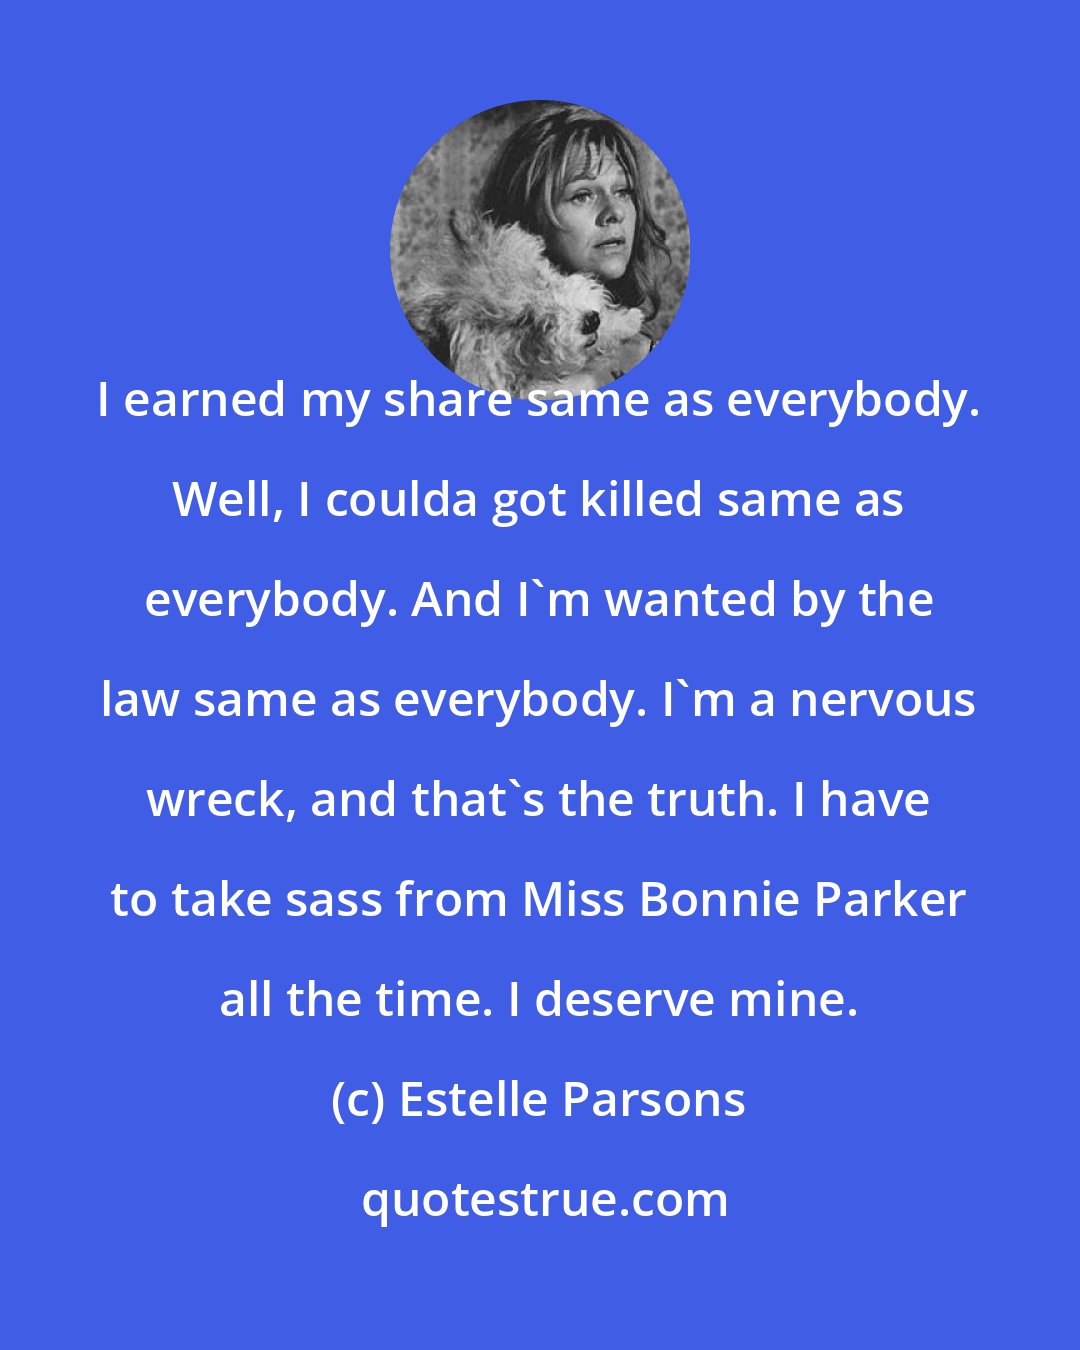 Estelle Parsons: I earned my share same as everybody. Well, I coulda got killed same as everybody. And I'm wanted by the law same as everybody. I'm a nervous wreck, and that's the truth. I have to take sass from Miss Bonnie Parker all the time. I deserve mine.